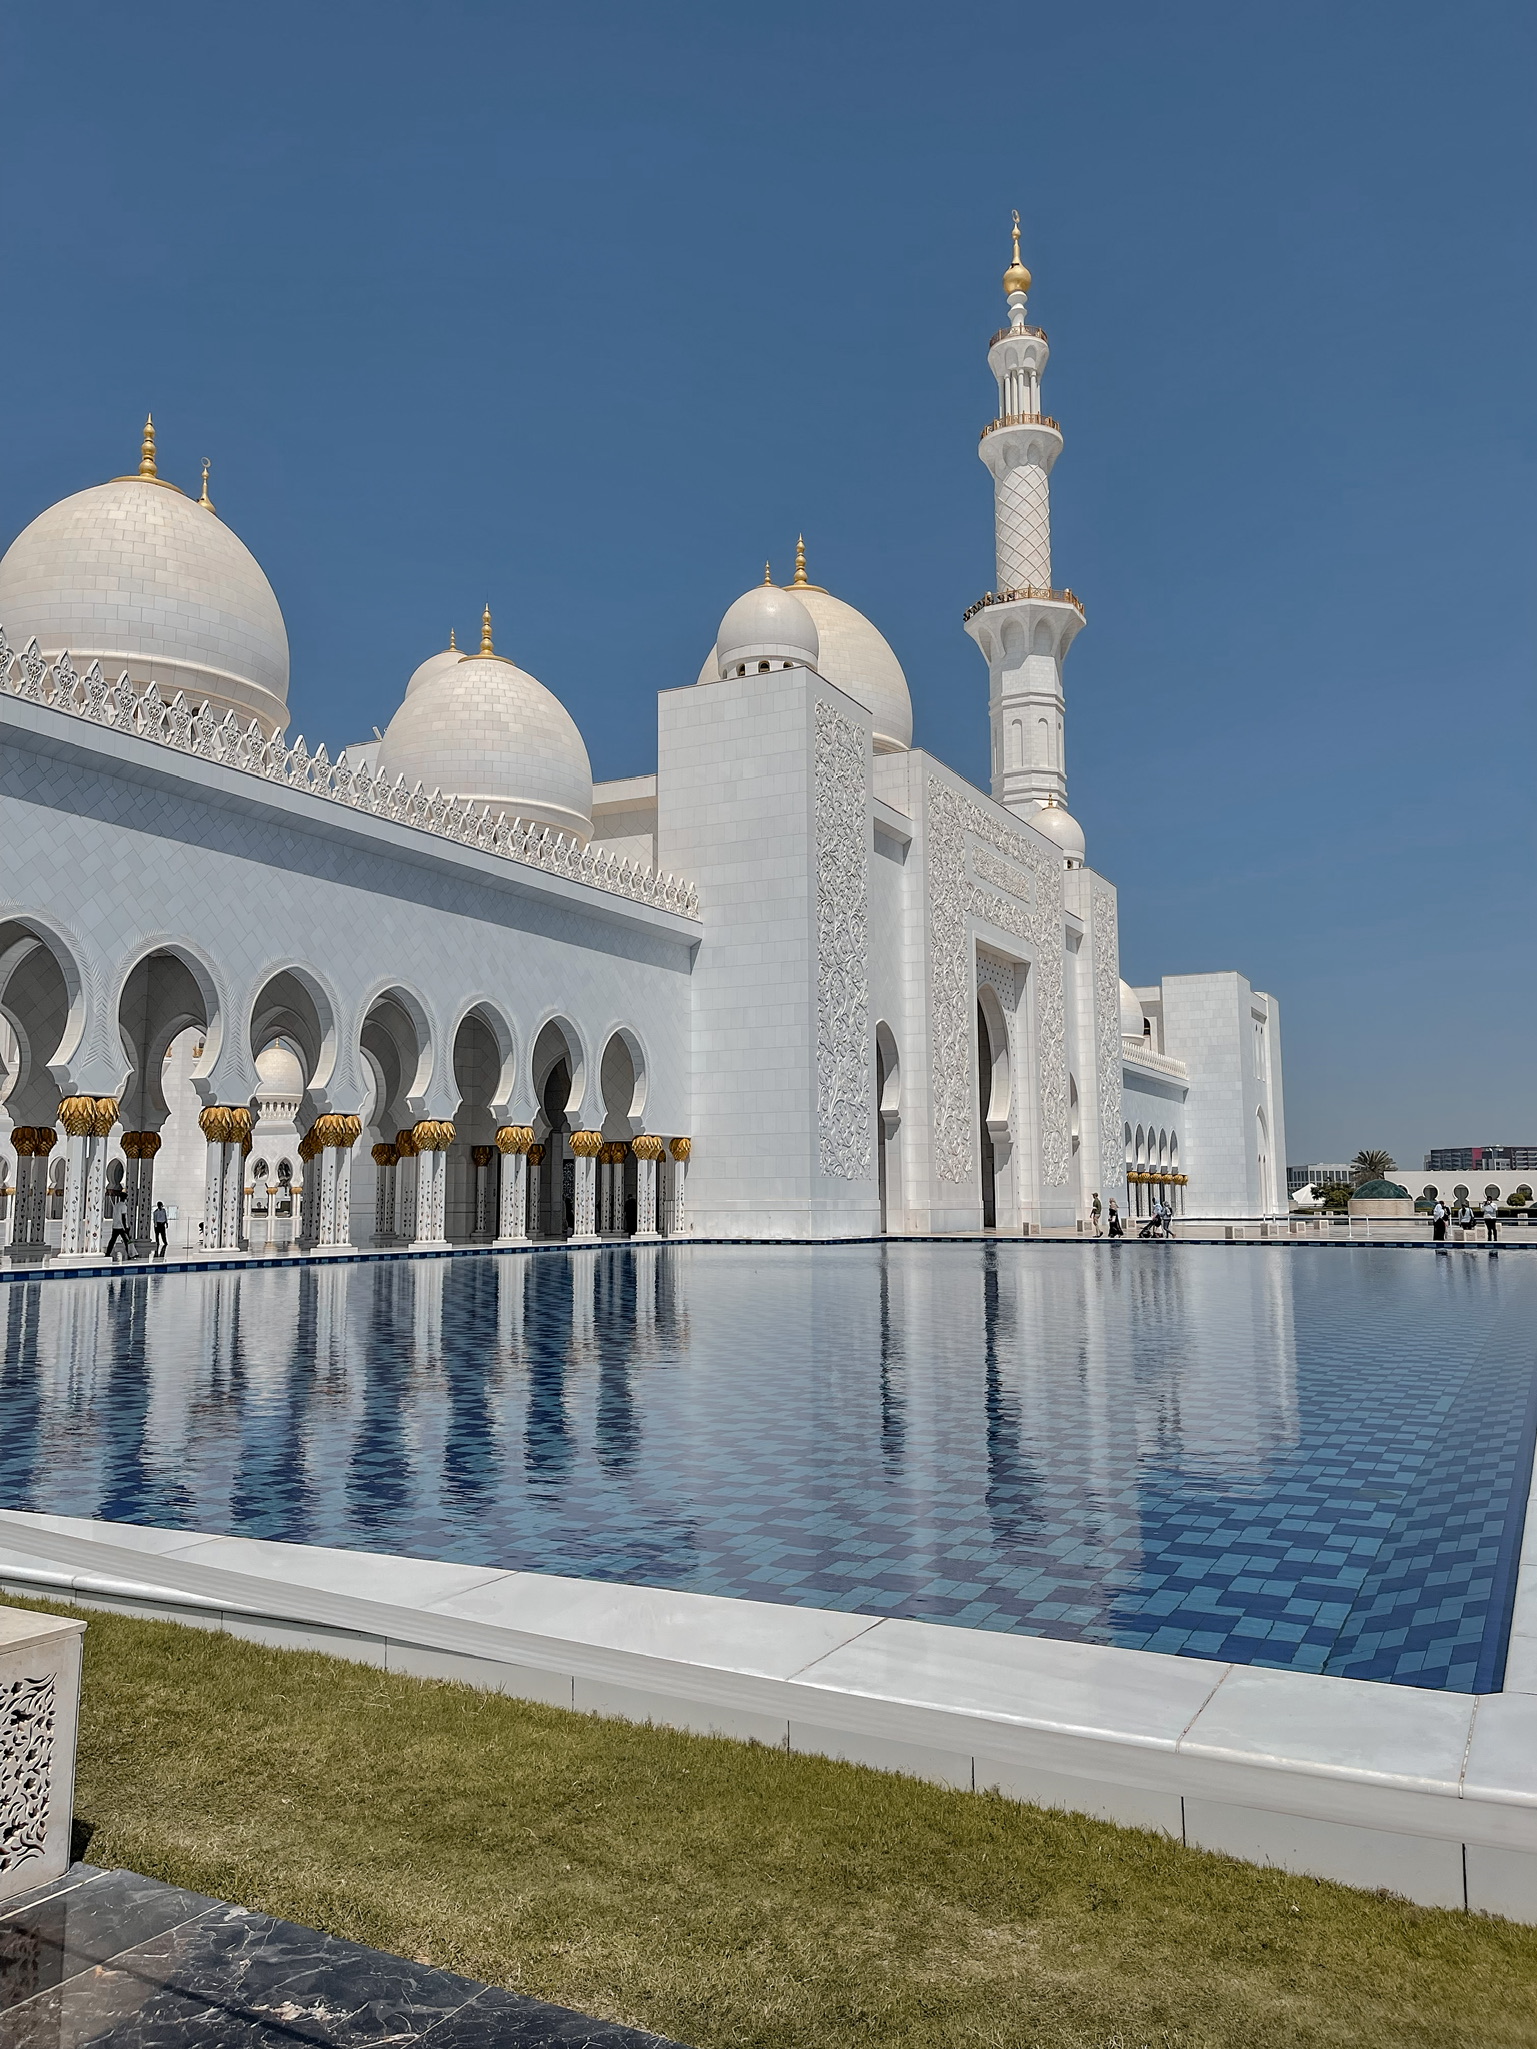 planning a trip to the middle east, where to go in the middle east, how to plan a trip to the middle east, abu dhabi, united arab emirates, UAE, erin busbee, busbee style, busbee family travels, Abu Dhabi trip, what to do in Abu Dhabi, Sheikh Zayad Grand Mosque